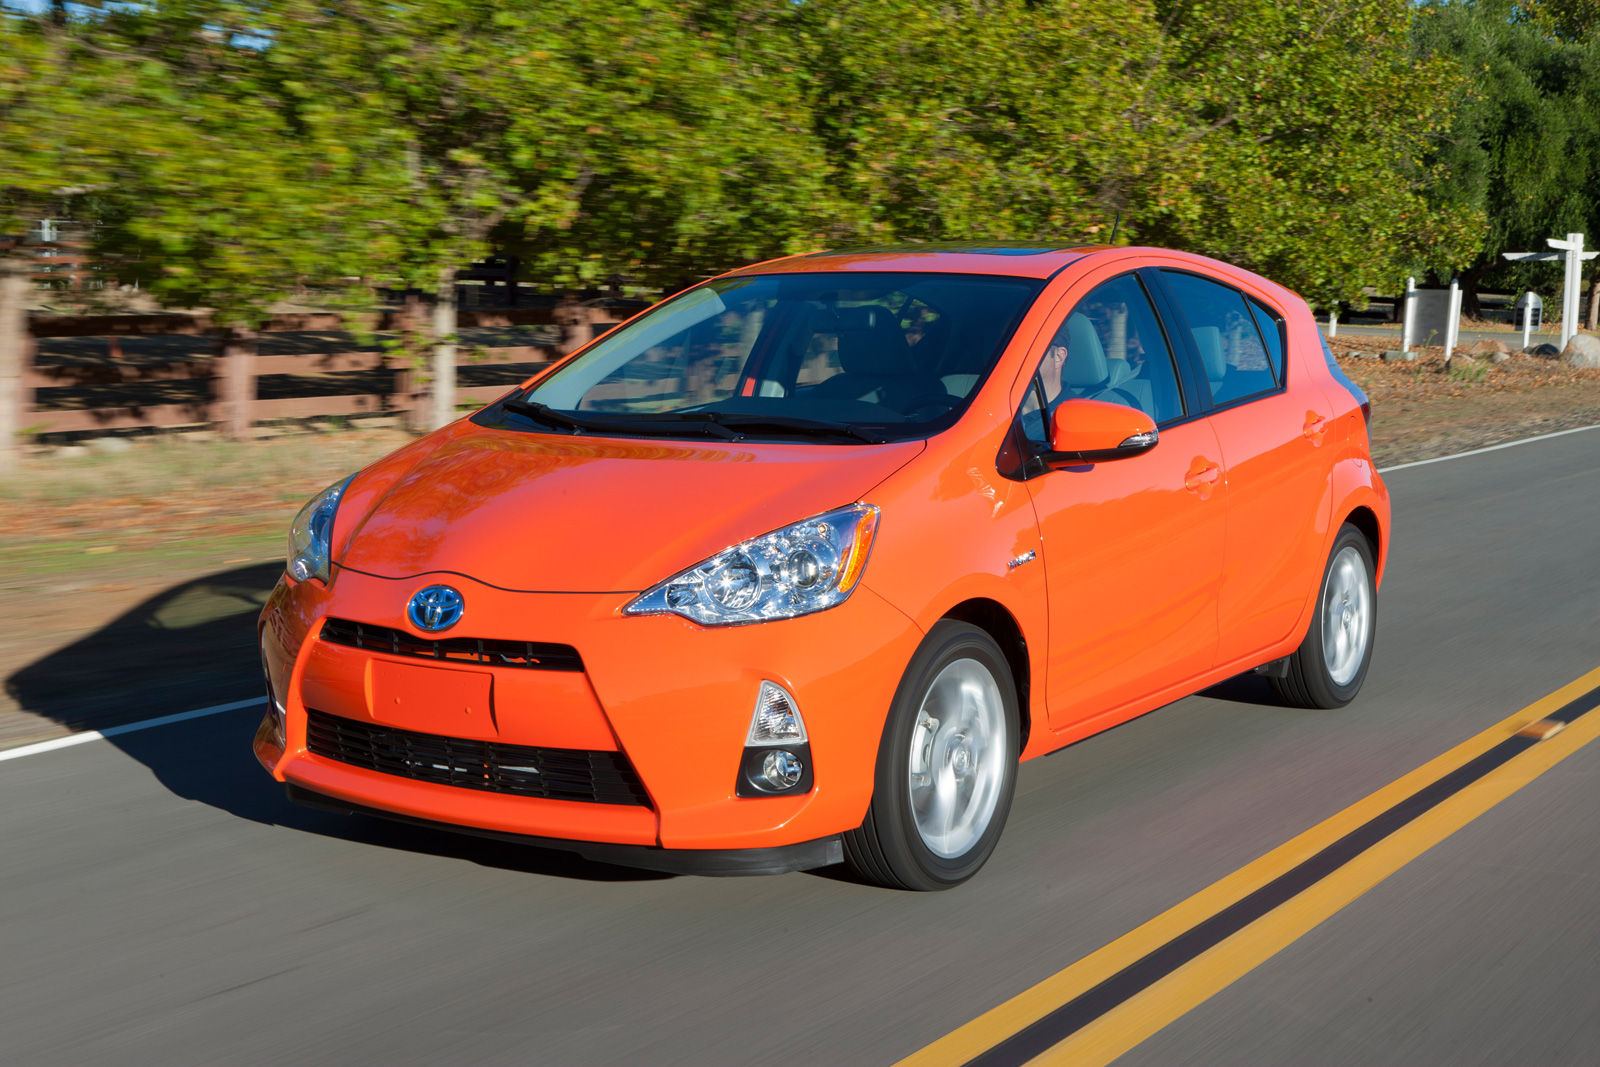 Hybrid cars: No Outlet, Just Gas and Go